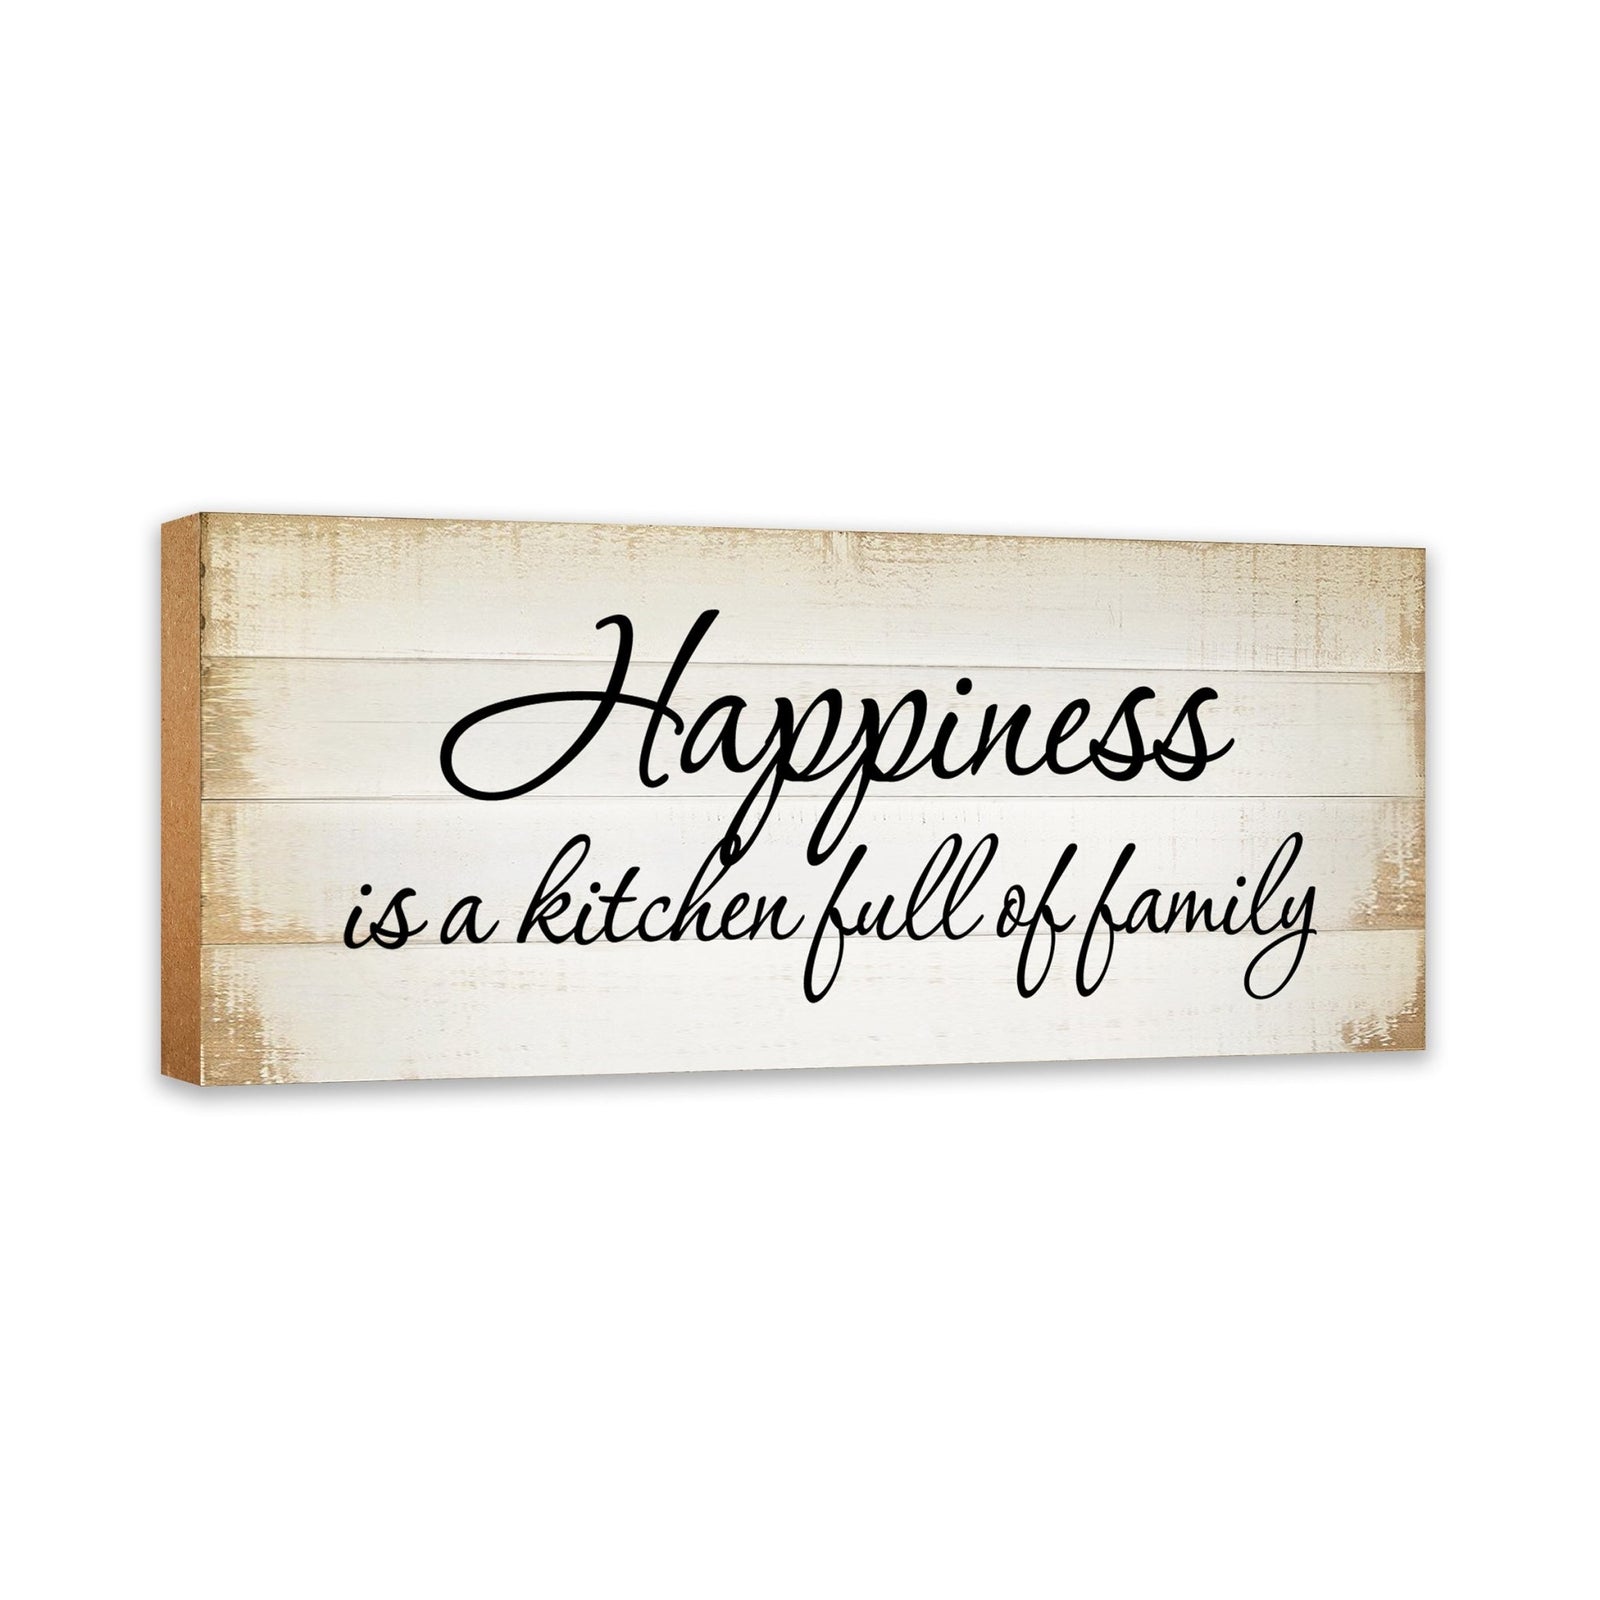 Inspirational Wooden Wall Hanging Plaque Kitchen Home Décor For All Season Decoration Happiness Is A Kitchen